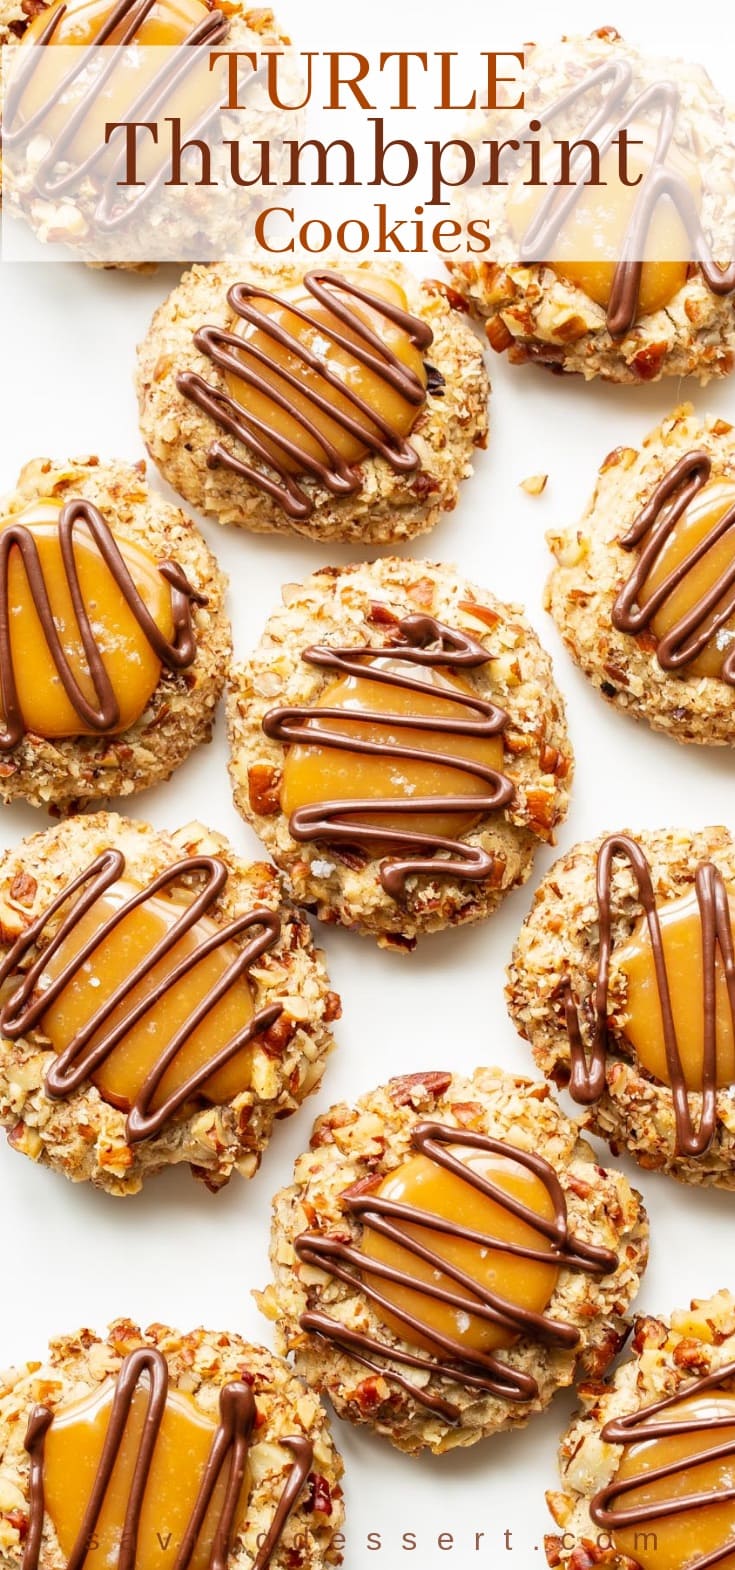 A plate of nutty turtle thumbprint cookies drizzled with chocolate